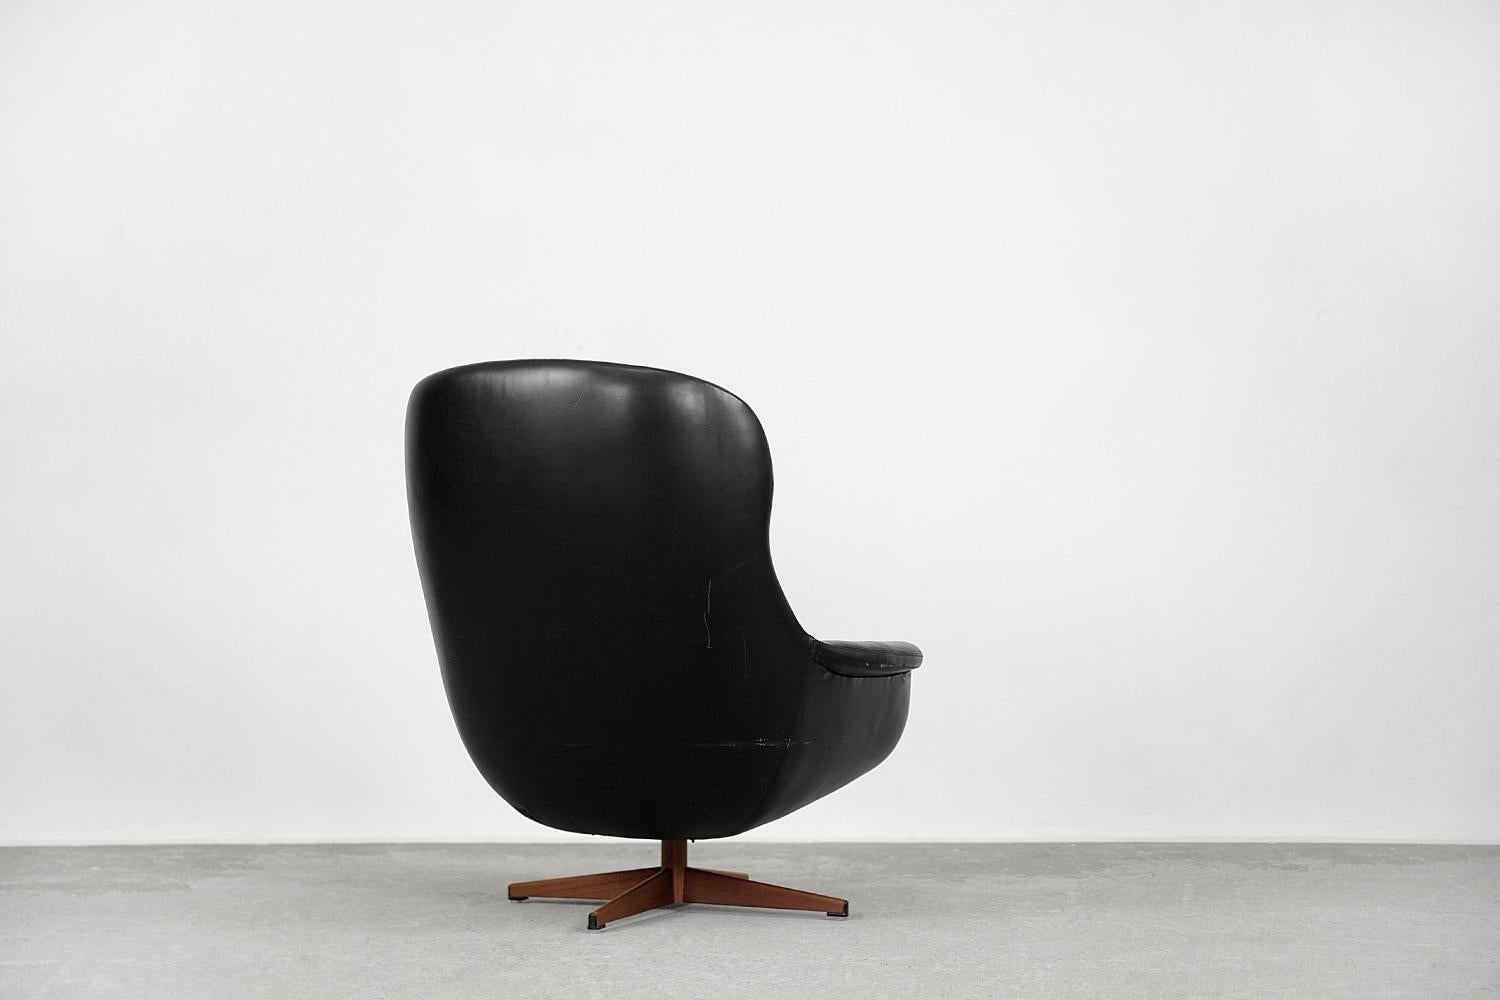 Vintage Swedish Modernist Leather Swivel Lounge Chair from Selig Imperial, 1970s For Sale 1